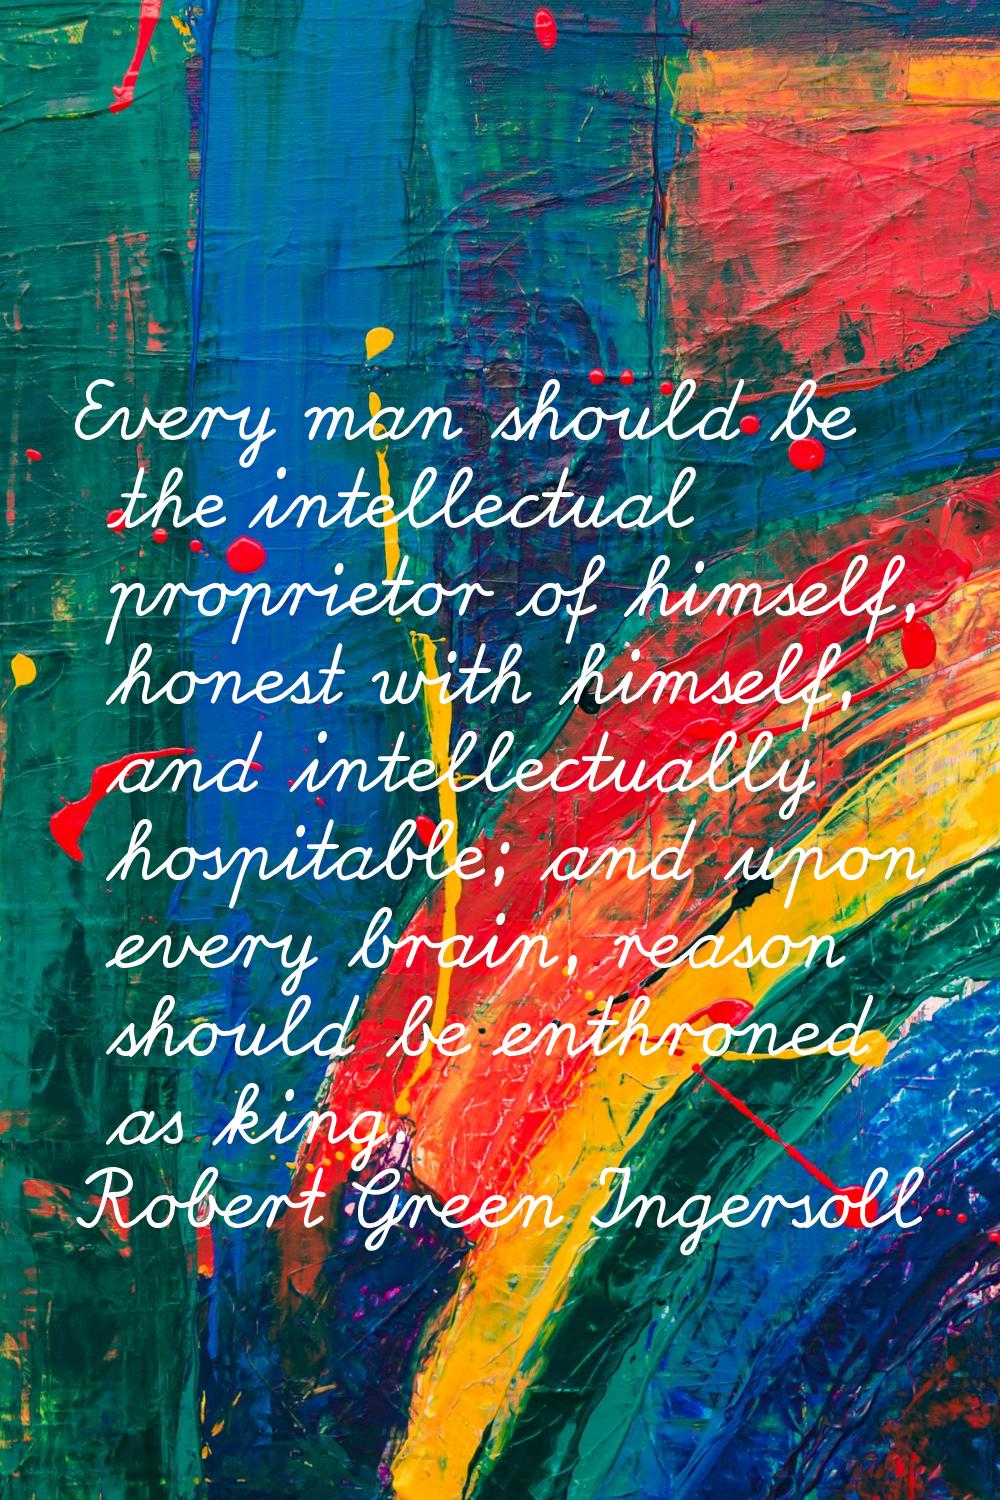 Every man should be the intellectual proprietor of himself, honest with himself, and intellectually